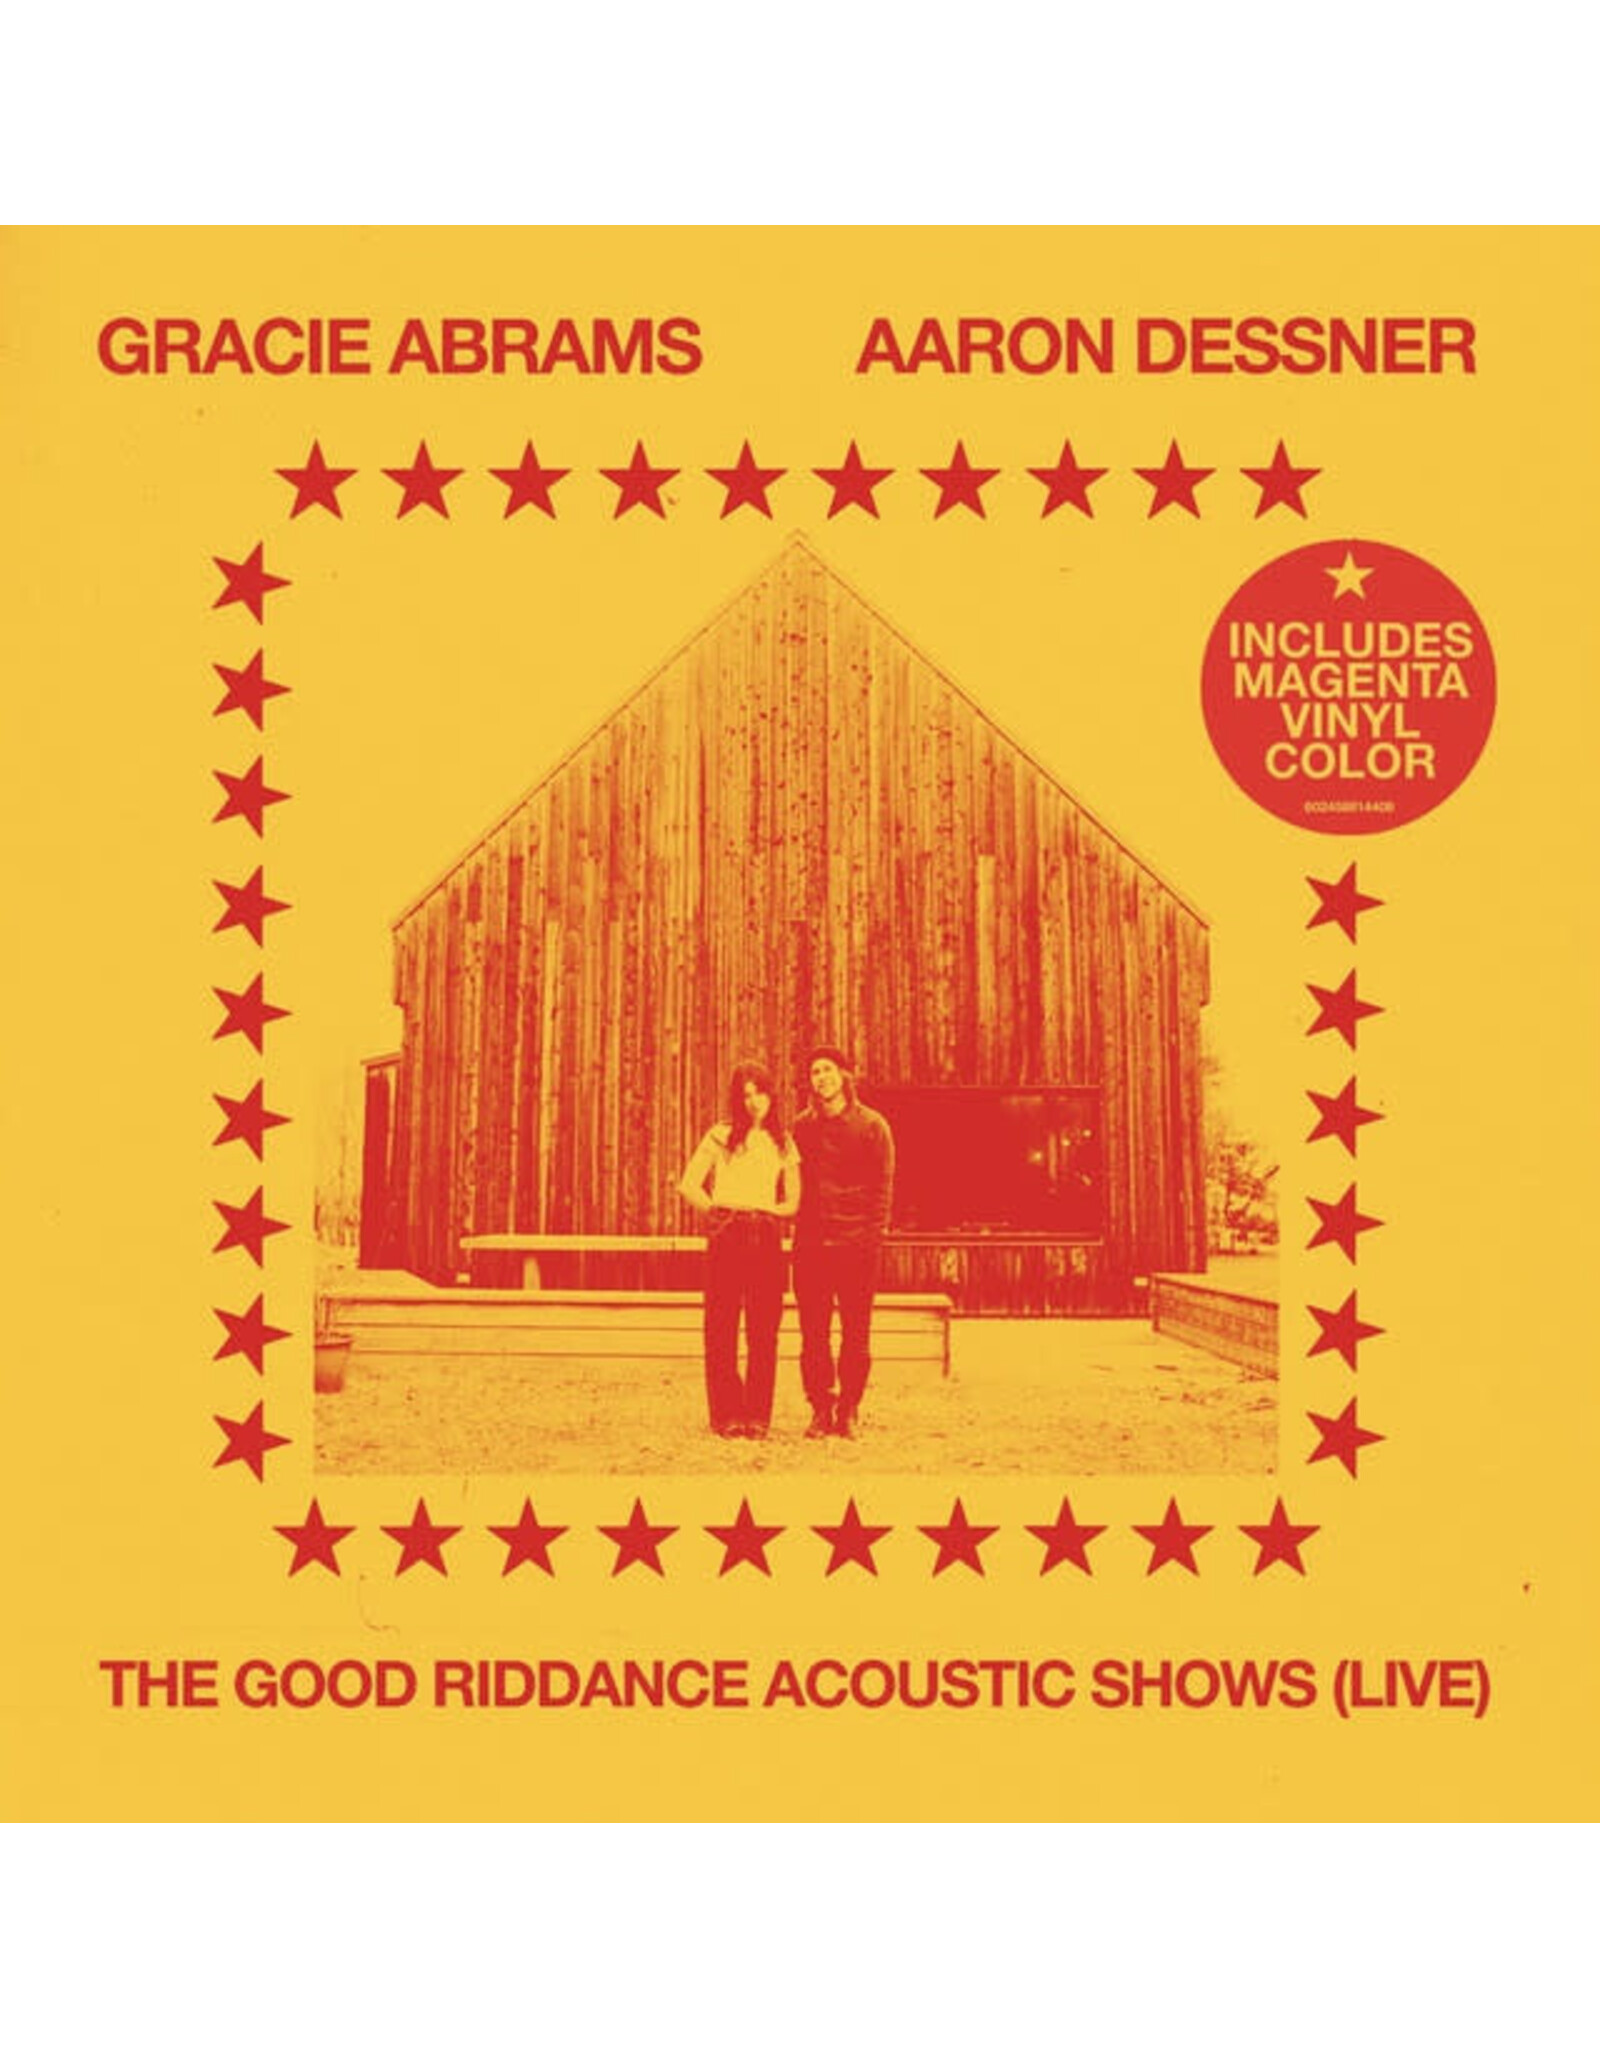 Interscope Abrams, Gracie: The Good Riddance Acoustic Shows (Live) (magenta) w/Aaron Dessner LP